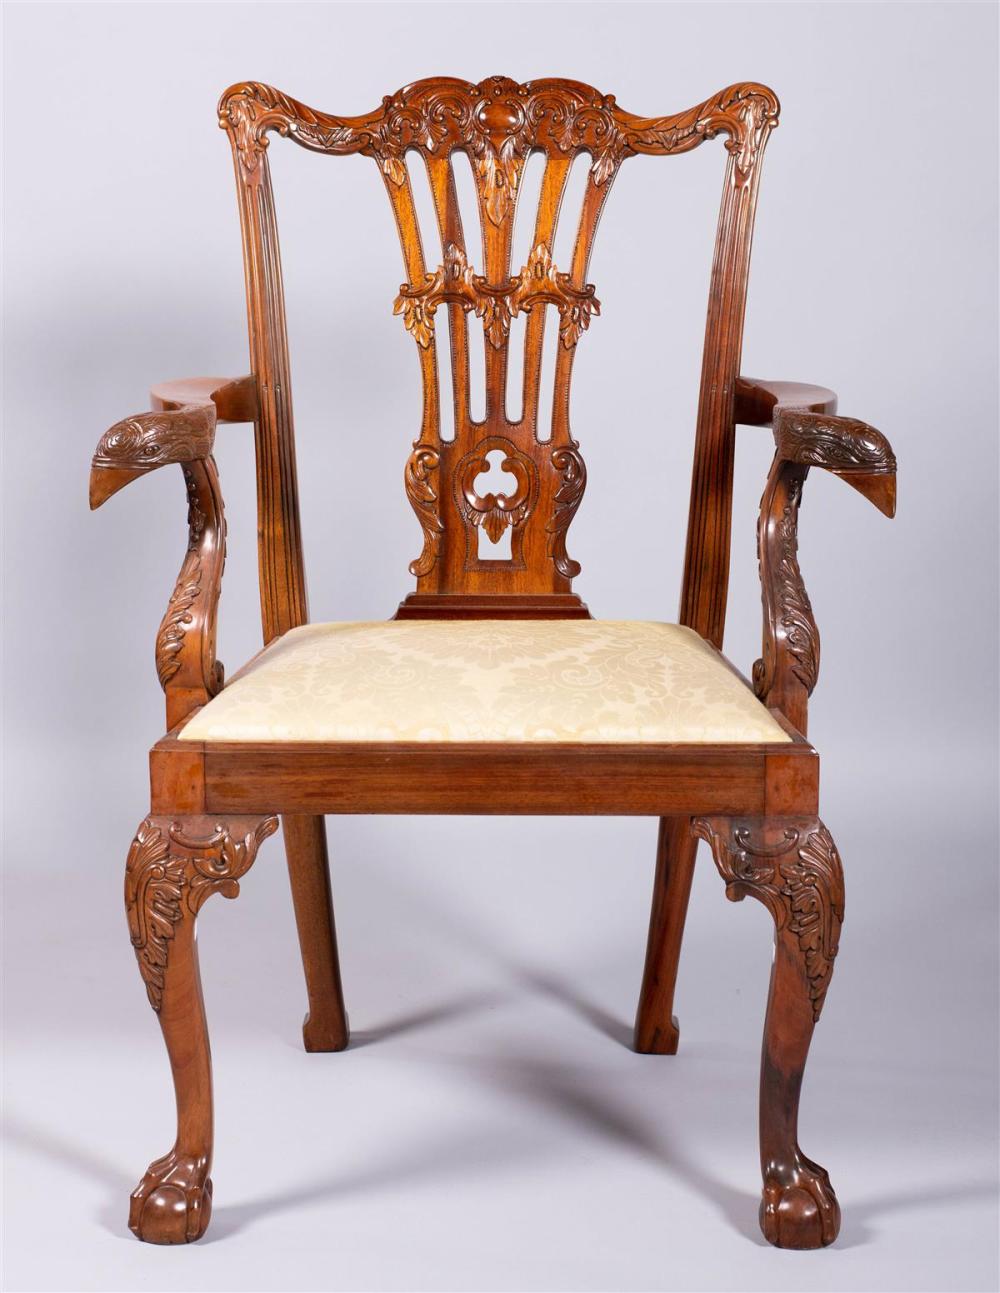 COLONIAL REVIVAL STYLE ARMCHAIR